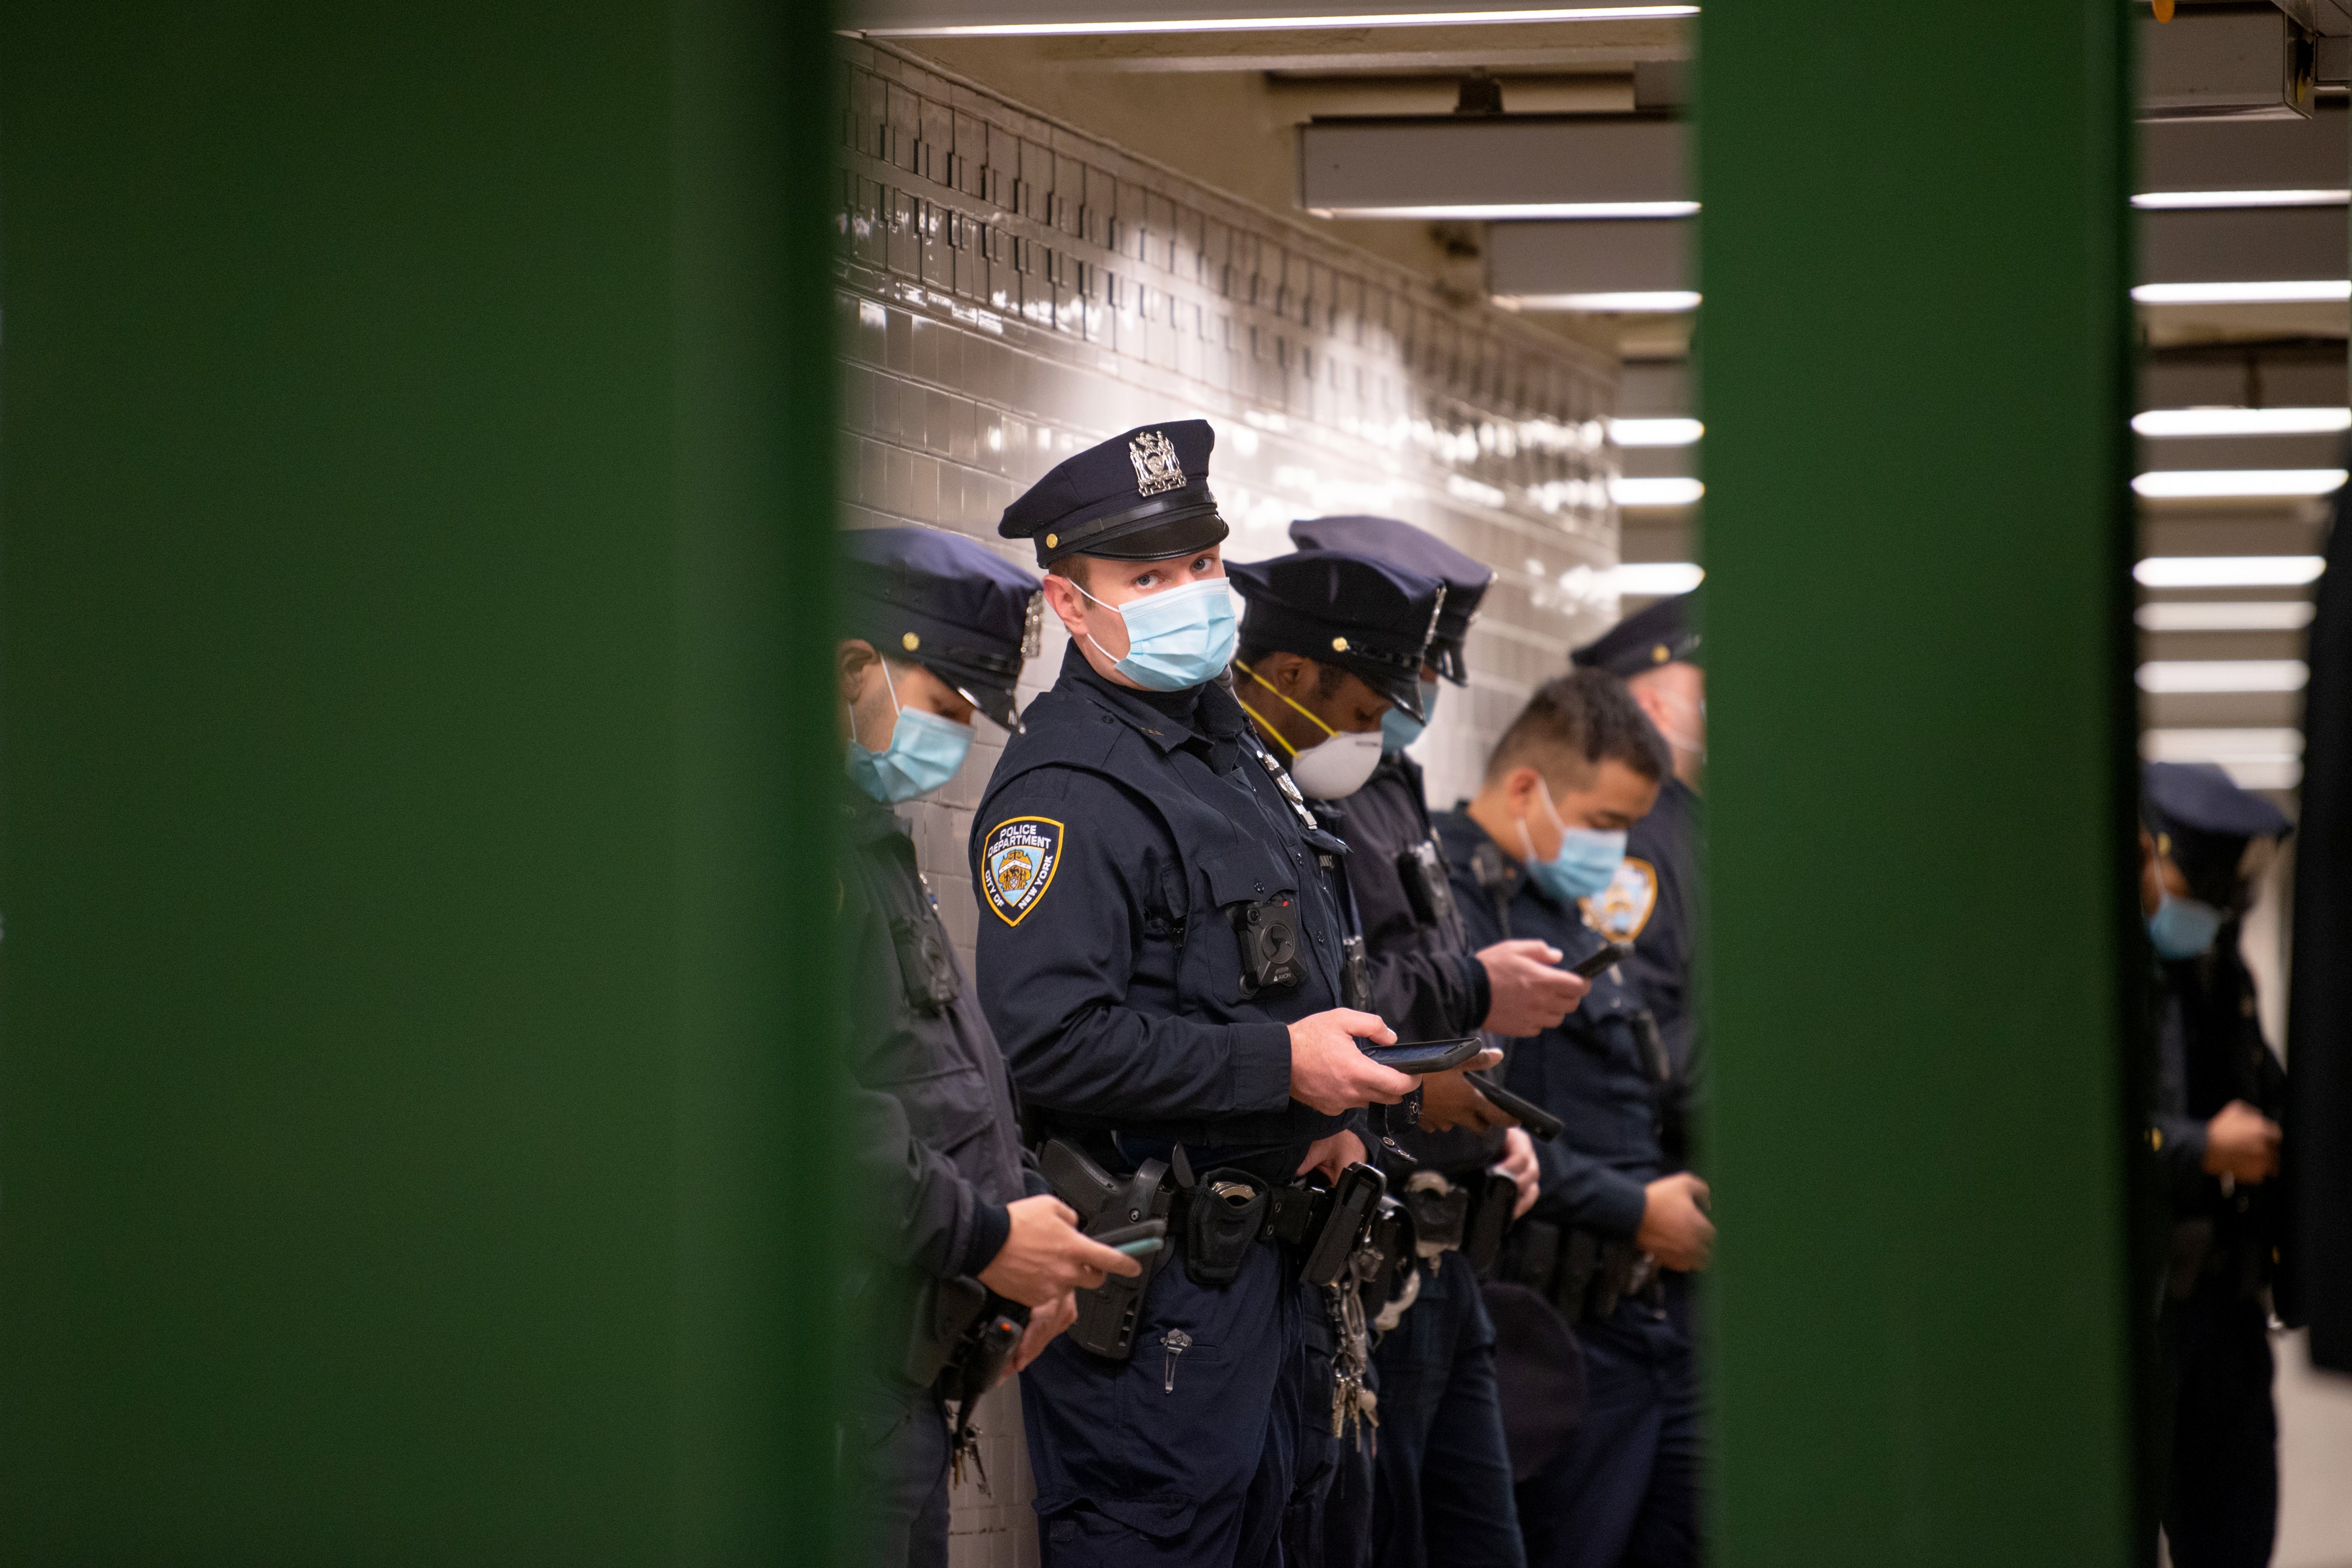 An NYPD officer wearing a mask looks at the camera during a briefing in the Union Square subway station May 6, 2020 in New York City. (Alexi Rosenfeld—Getty Images)